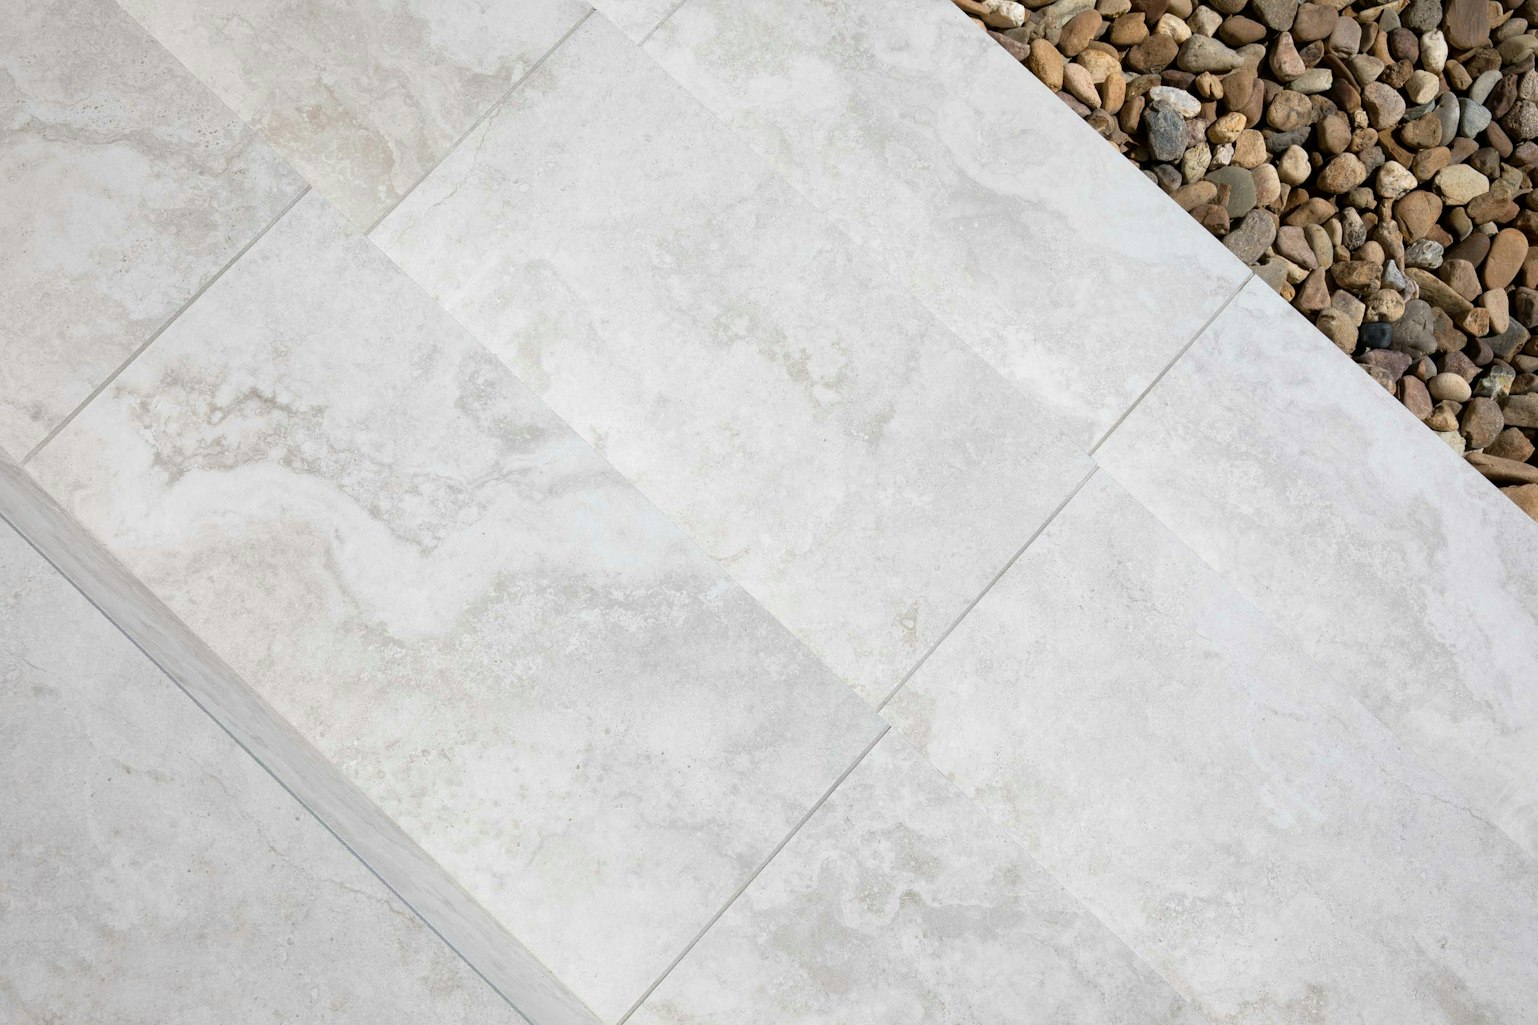 Porcelain-Pavers-Outdoor-20 Gallery silver-travertine-01